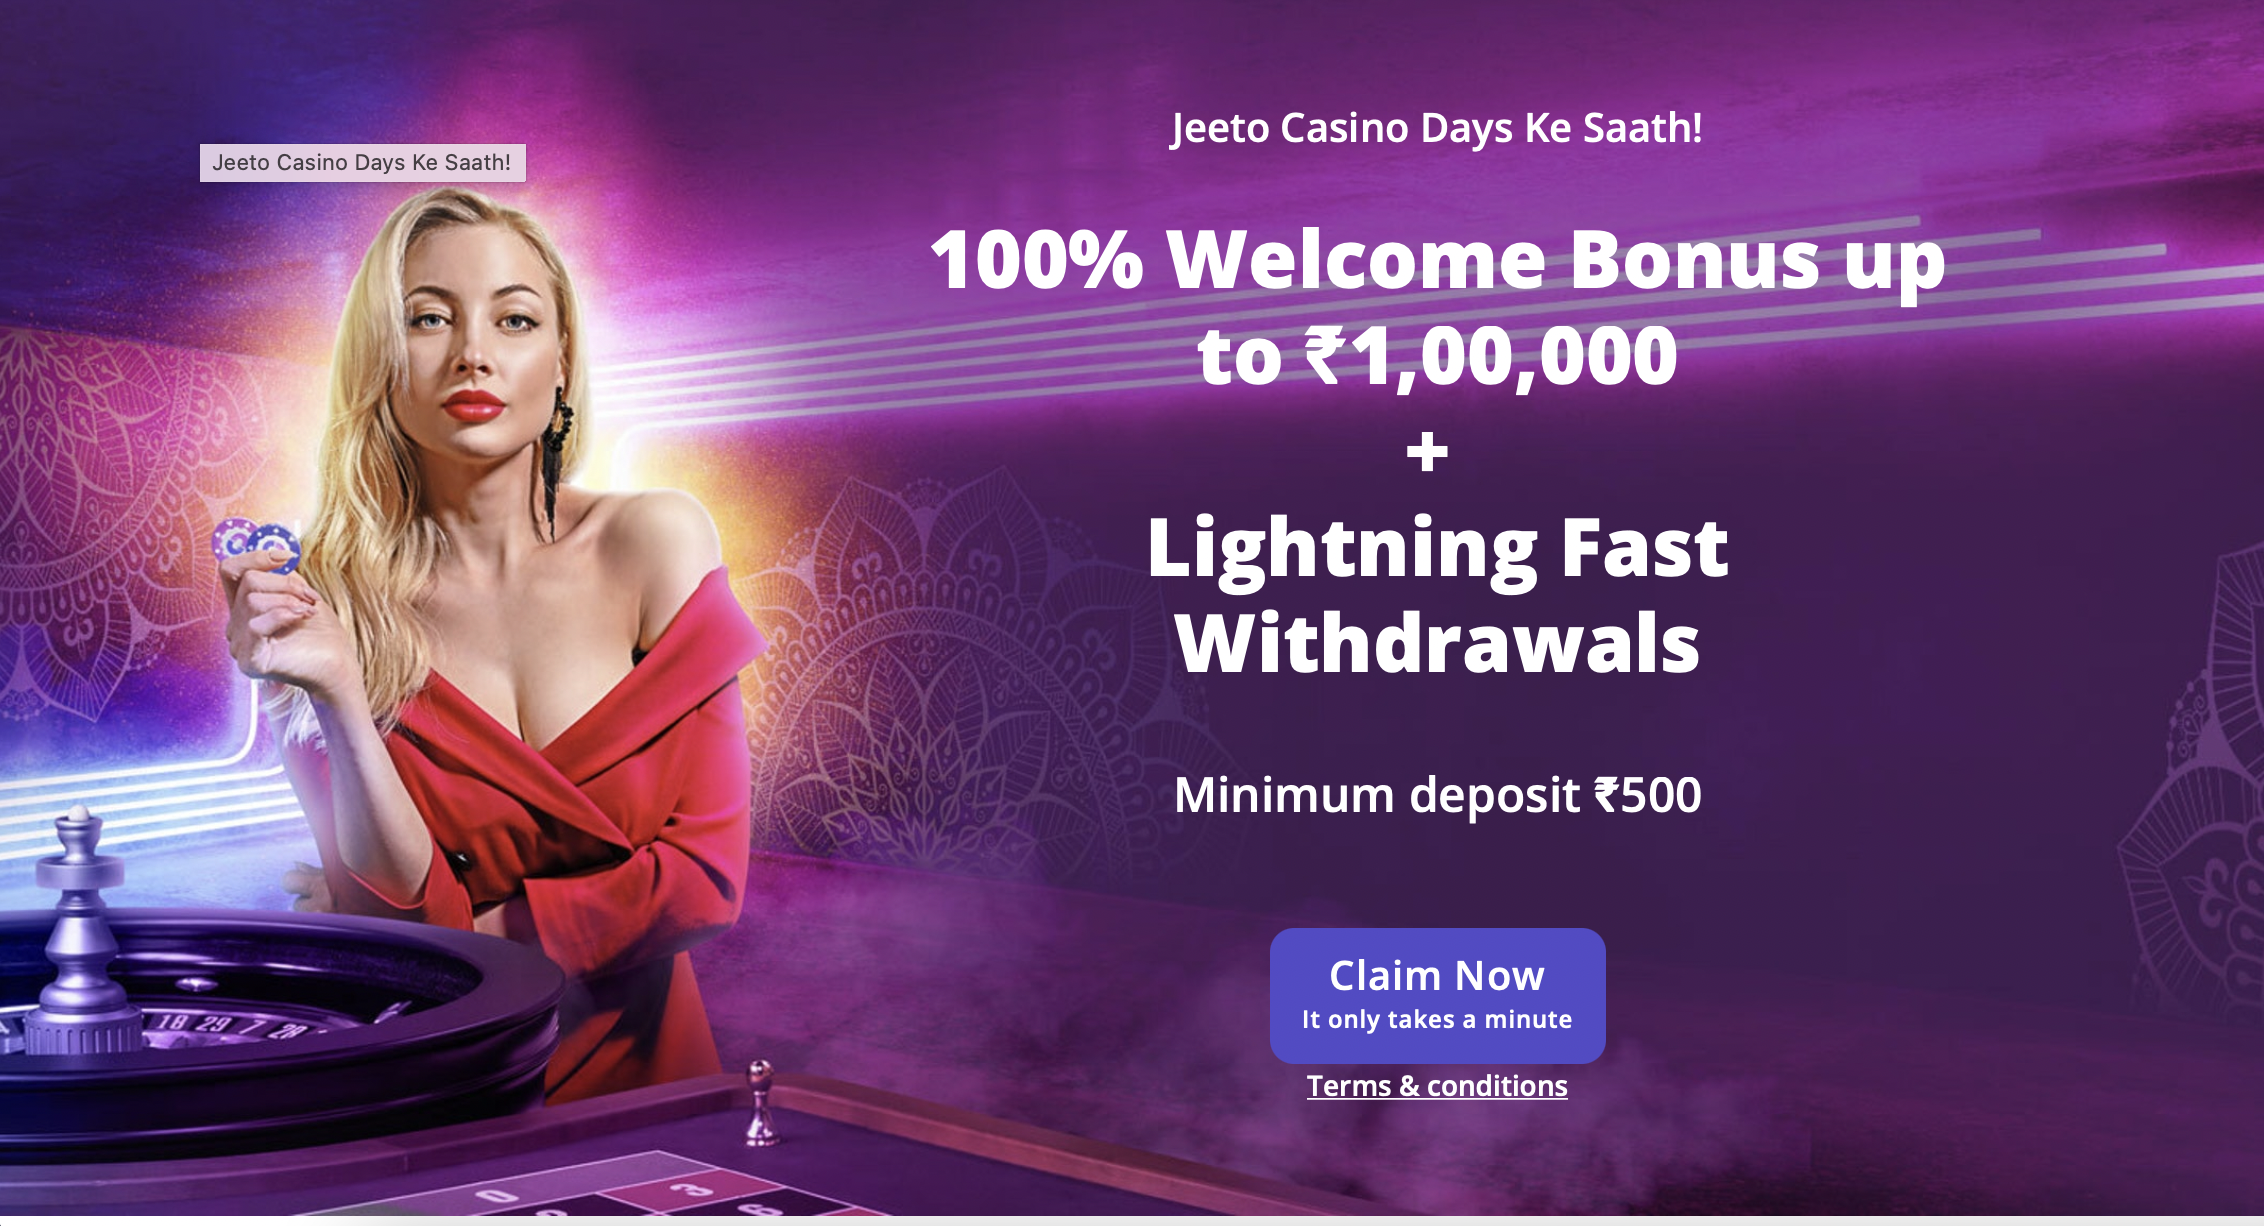 Top 10 online casino sites of 2022: Check out the reviews